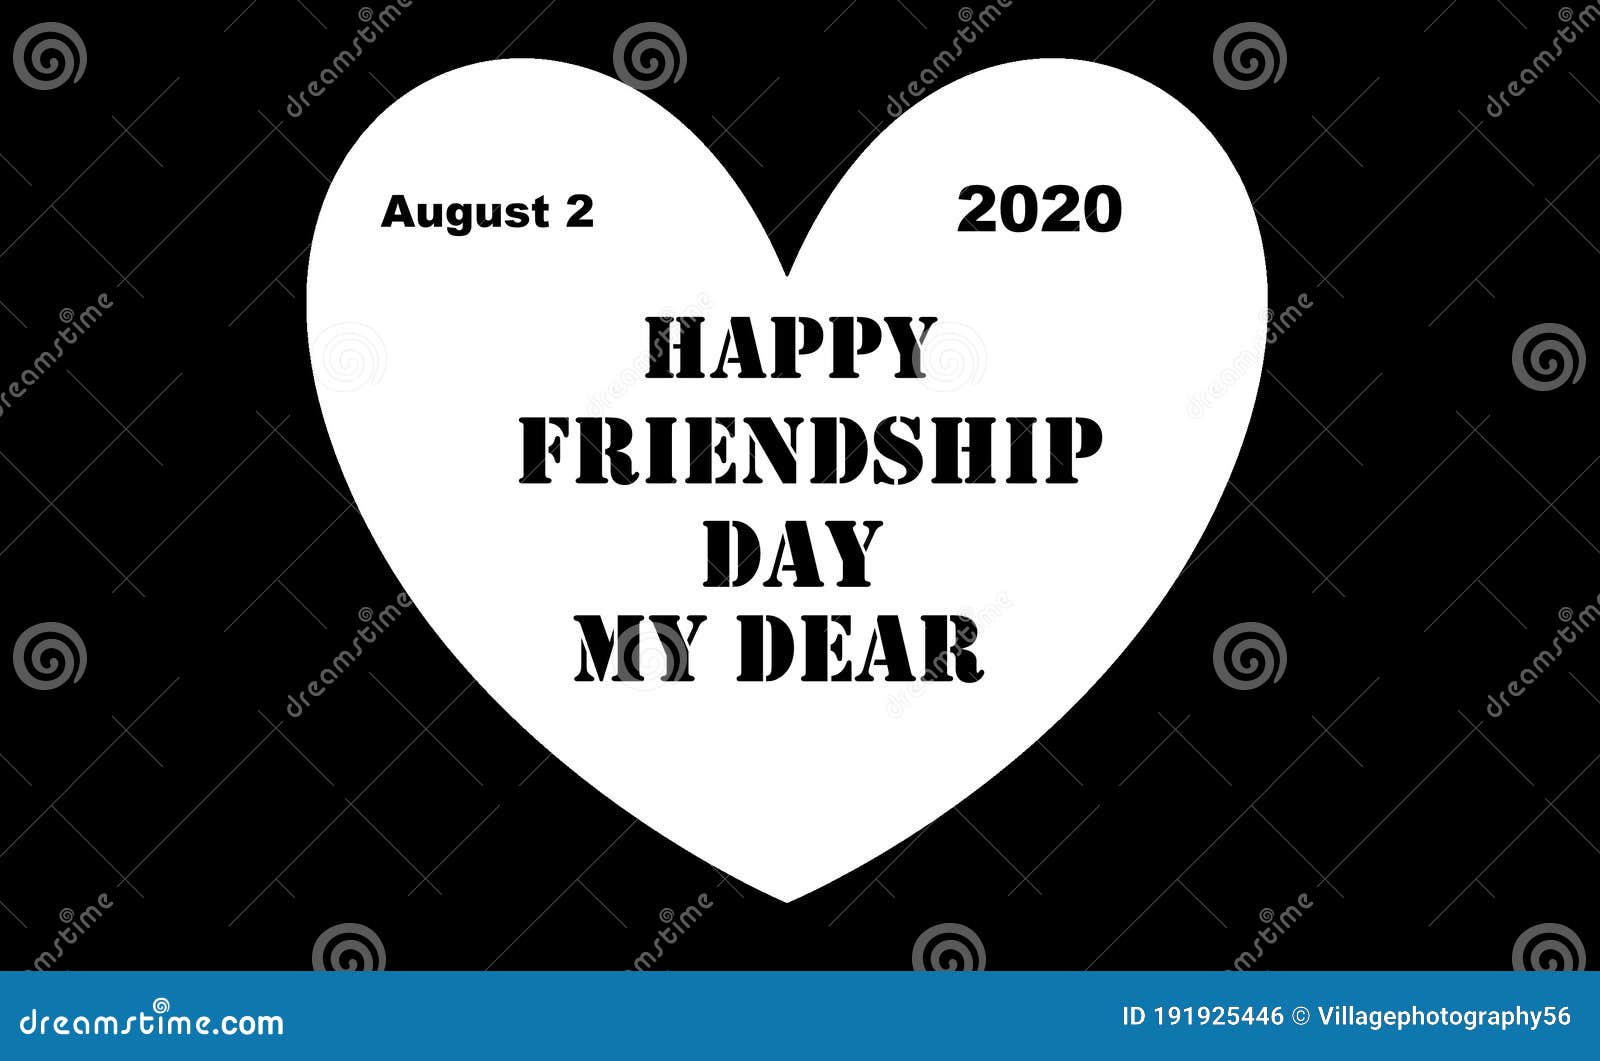 Happy Friendship Day 2020 Written on Black and White Heart Stock ...